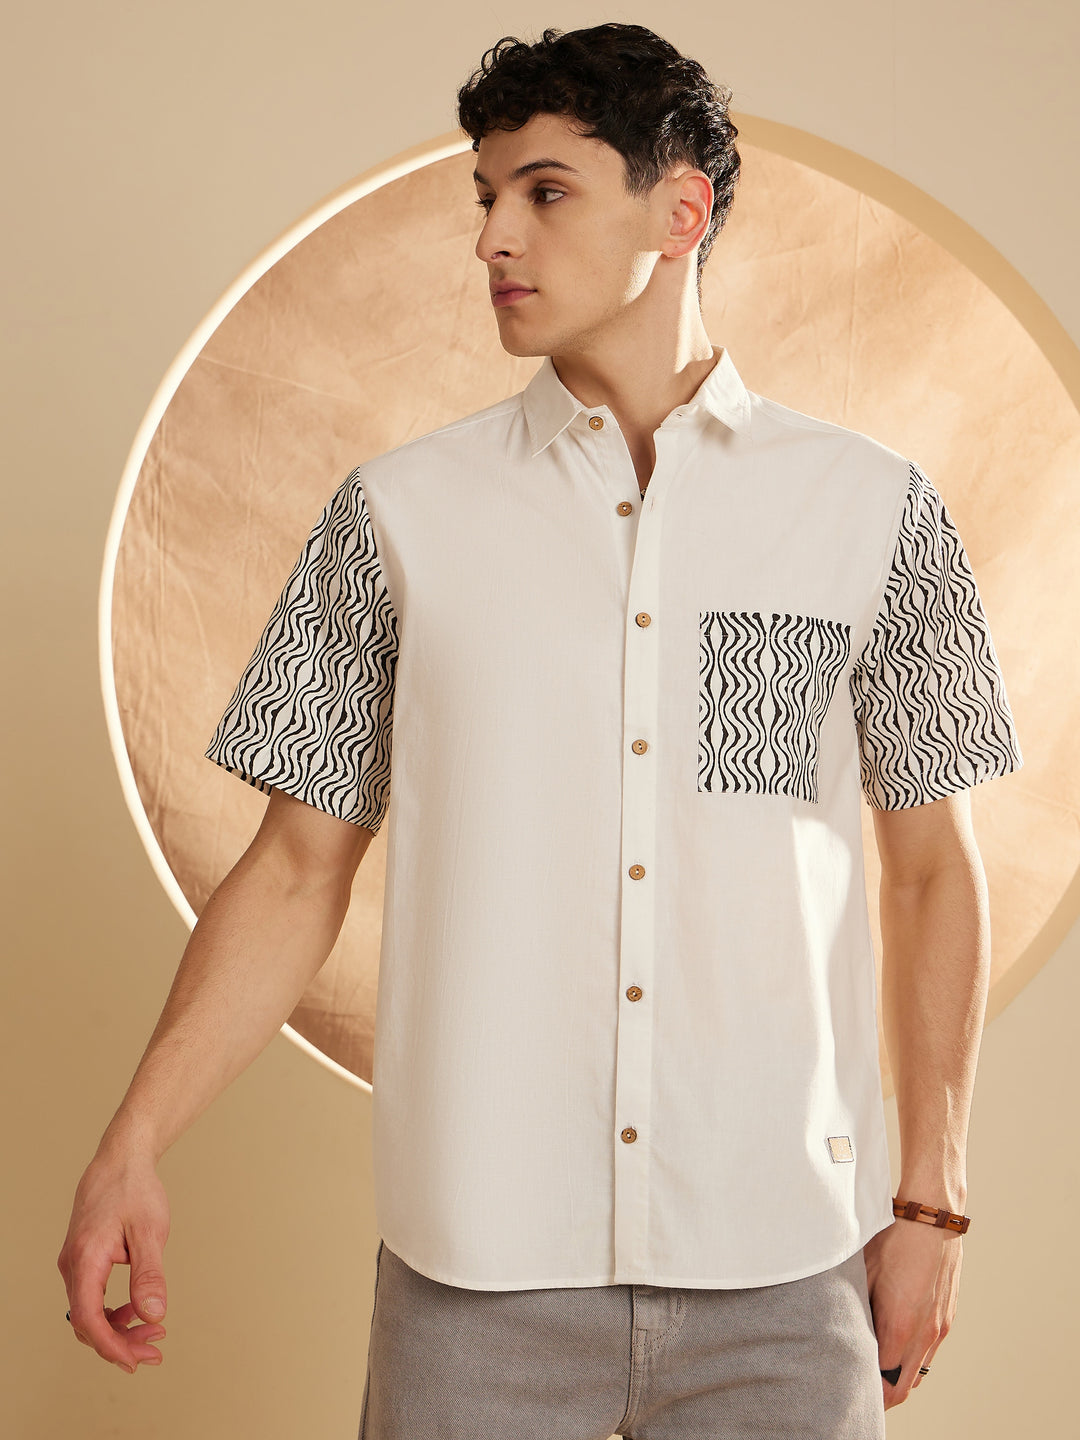 DENNISON White Color Placement Printed Casual Shirt